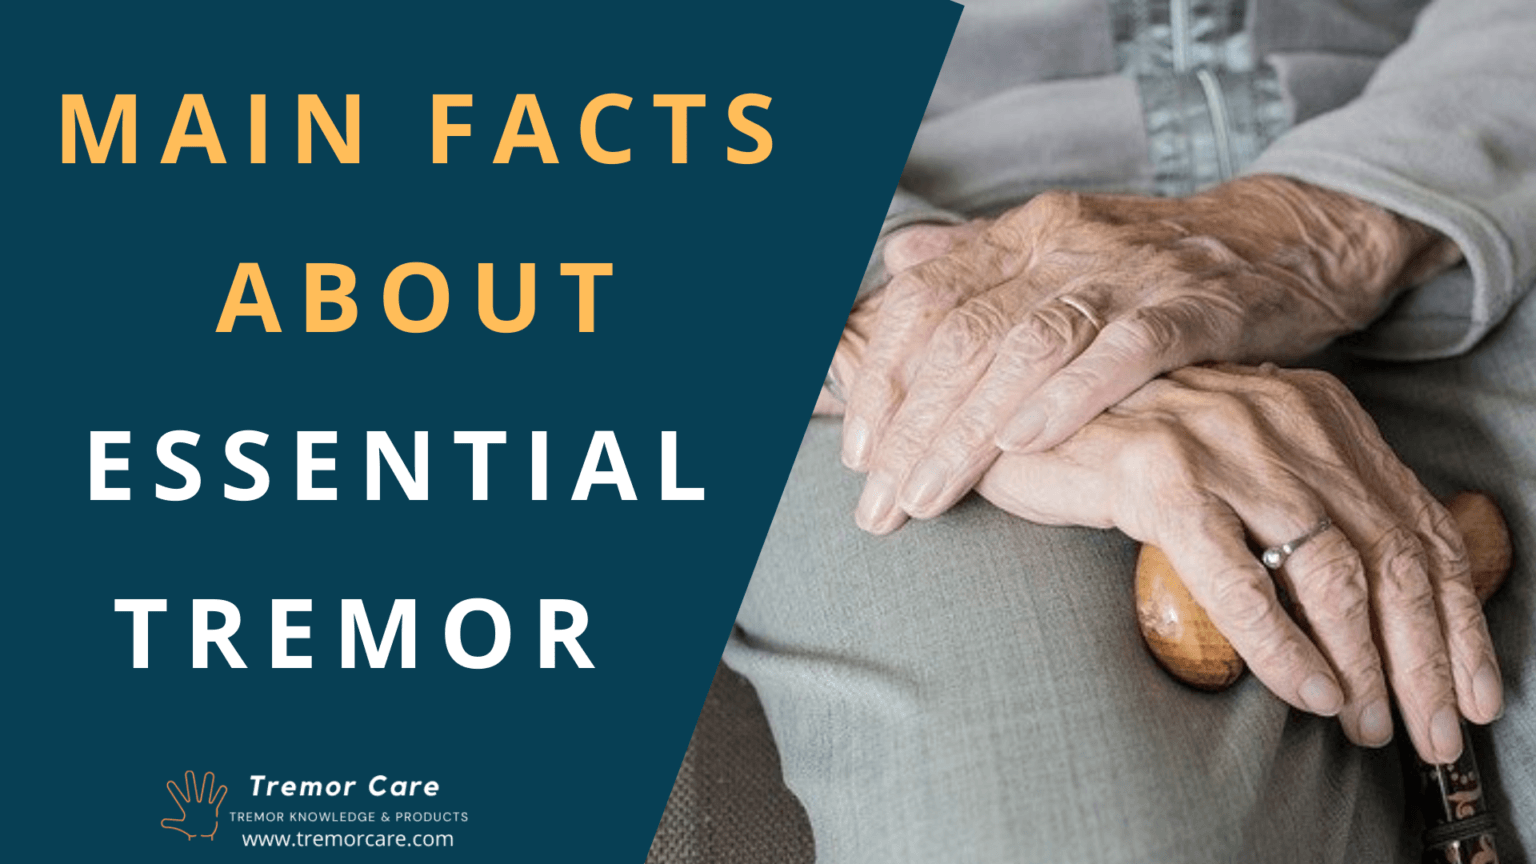 Essential Tremor Heres What You Need To Know About This Disease Tremor Care